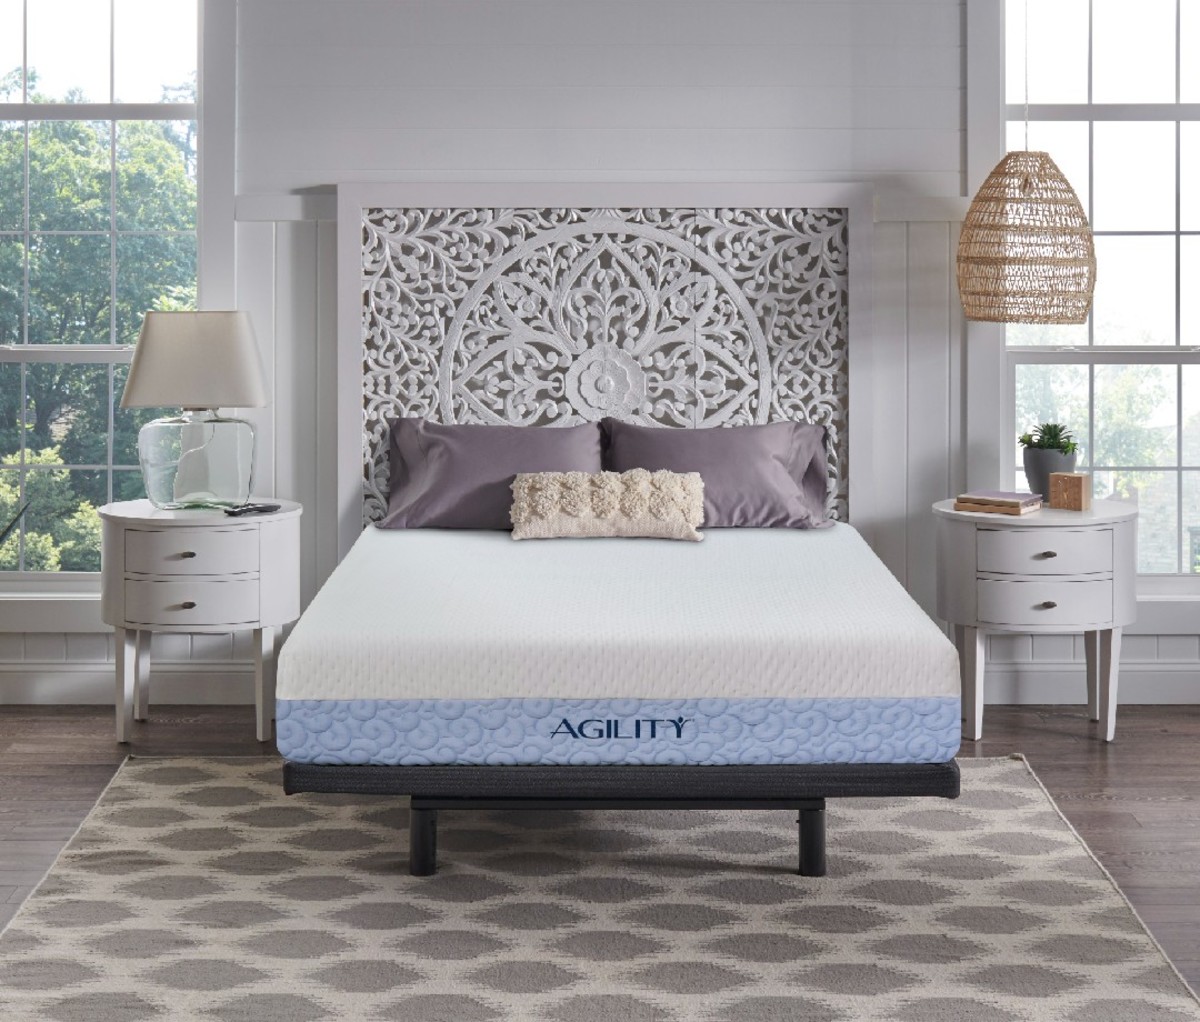 A picture of an Agility by Therapedic, Agility Hybrid Mattress in a bedroom.